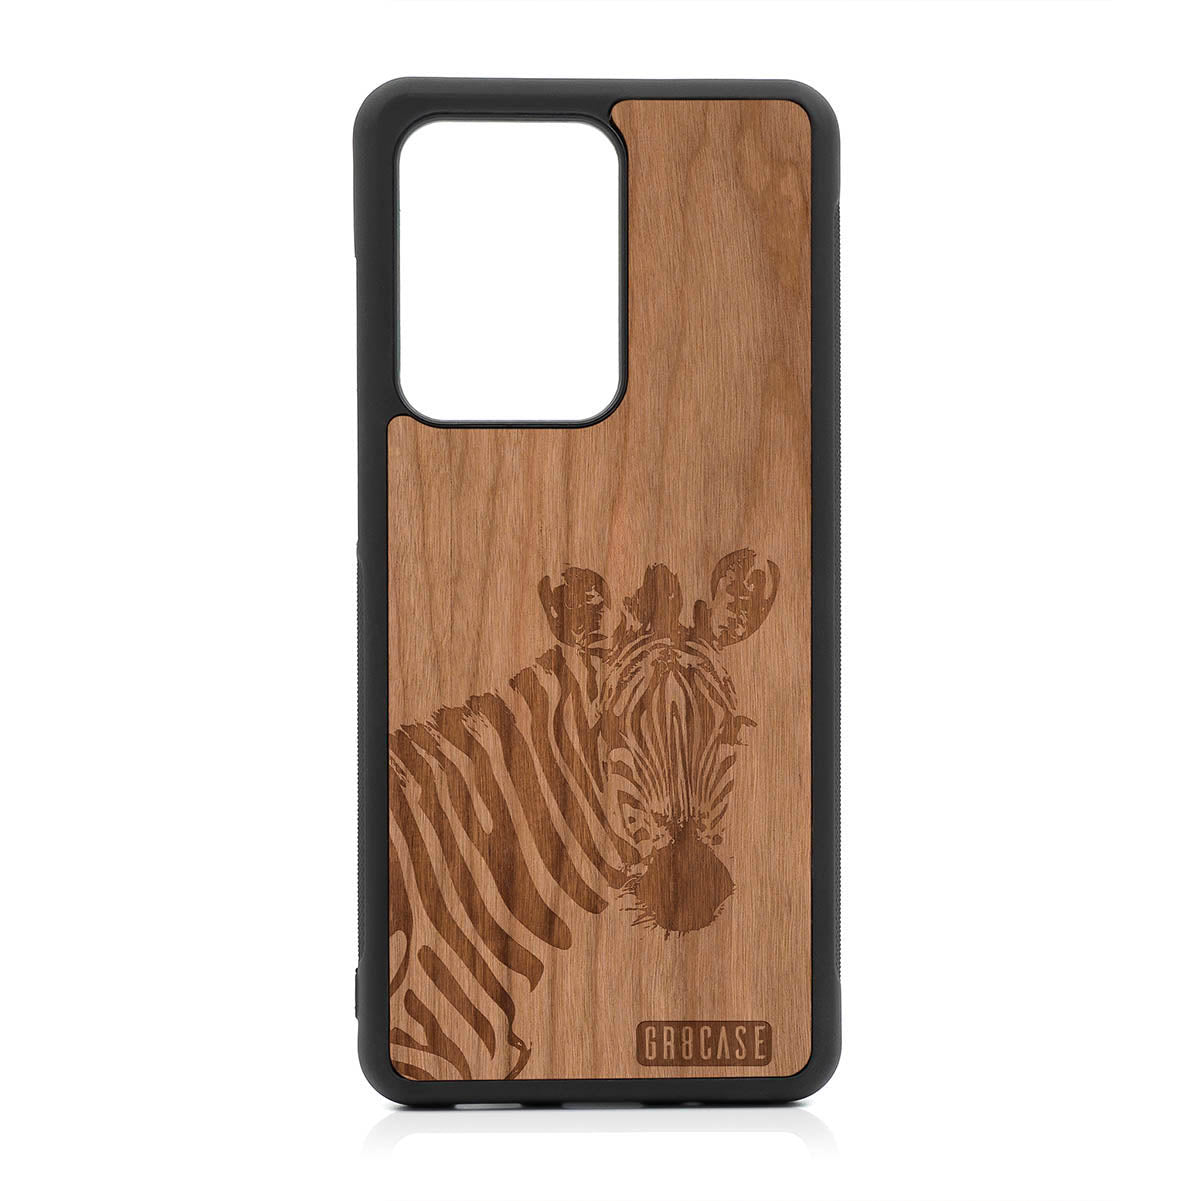 Lookout Zebra Design Wood Case For Samsung Galaxy S20 Ultra